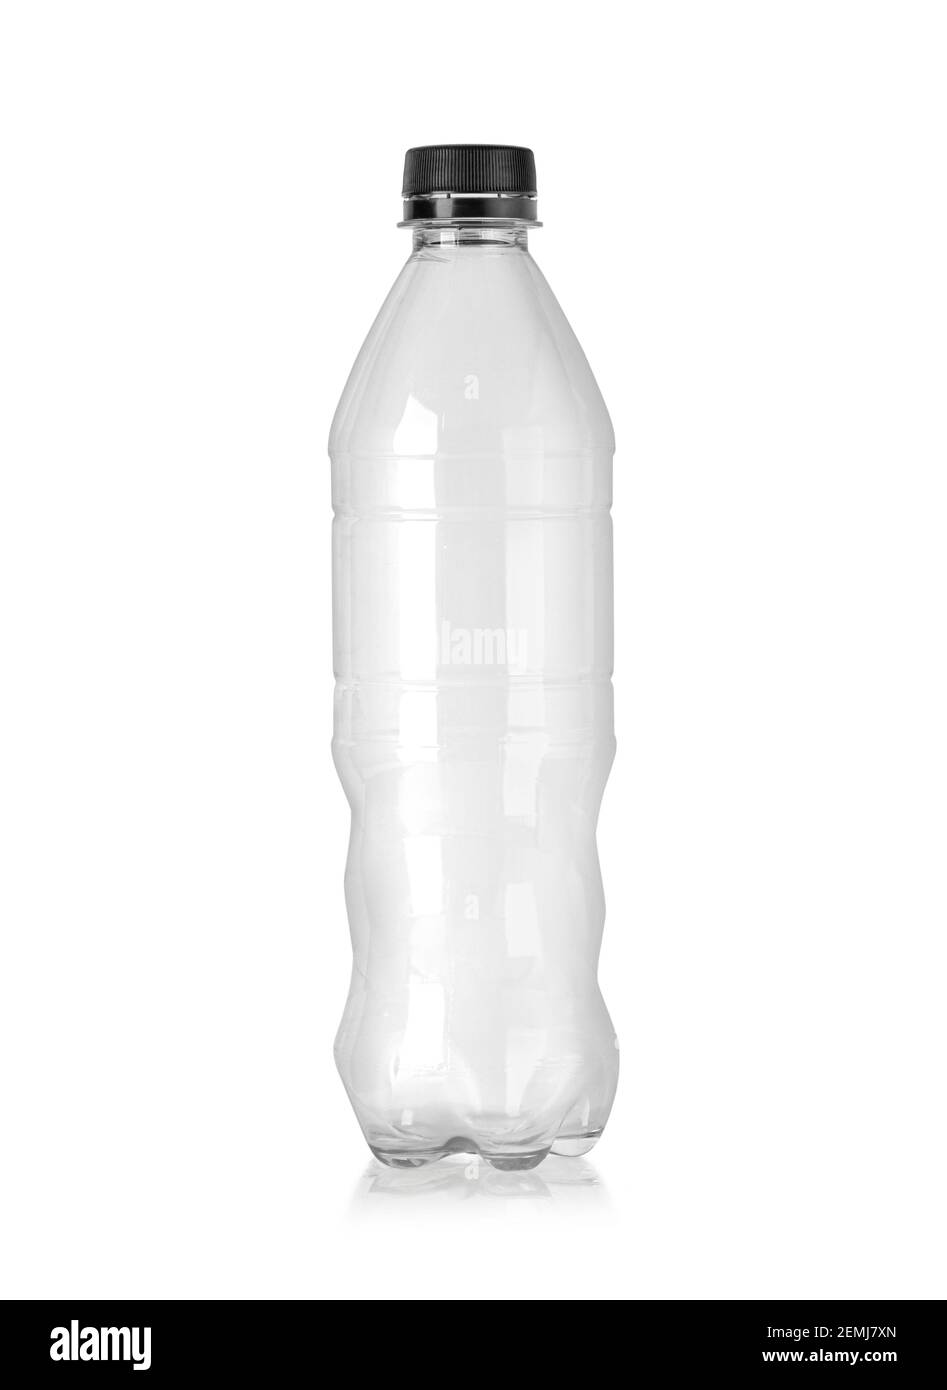 https://c8.alamy.com/comp/2EMJ7XN/empty-plastic-bottle-with-black-lid-isolated-on-white-with-clipping-path-2EMJ7XN.jpg